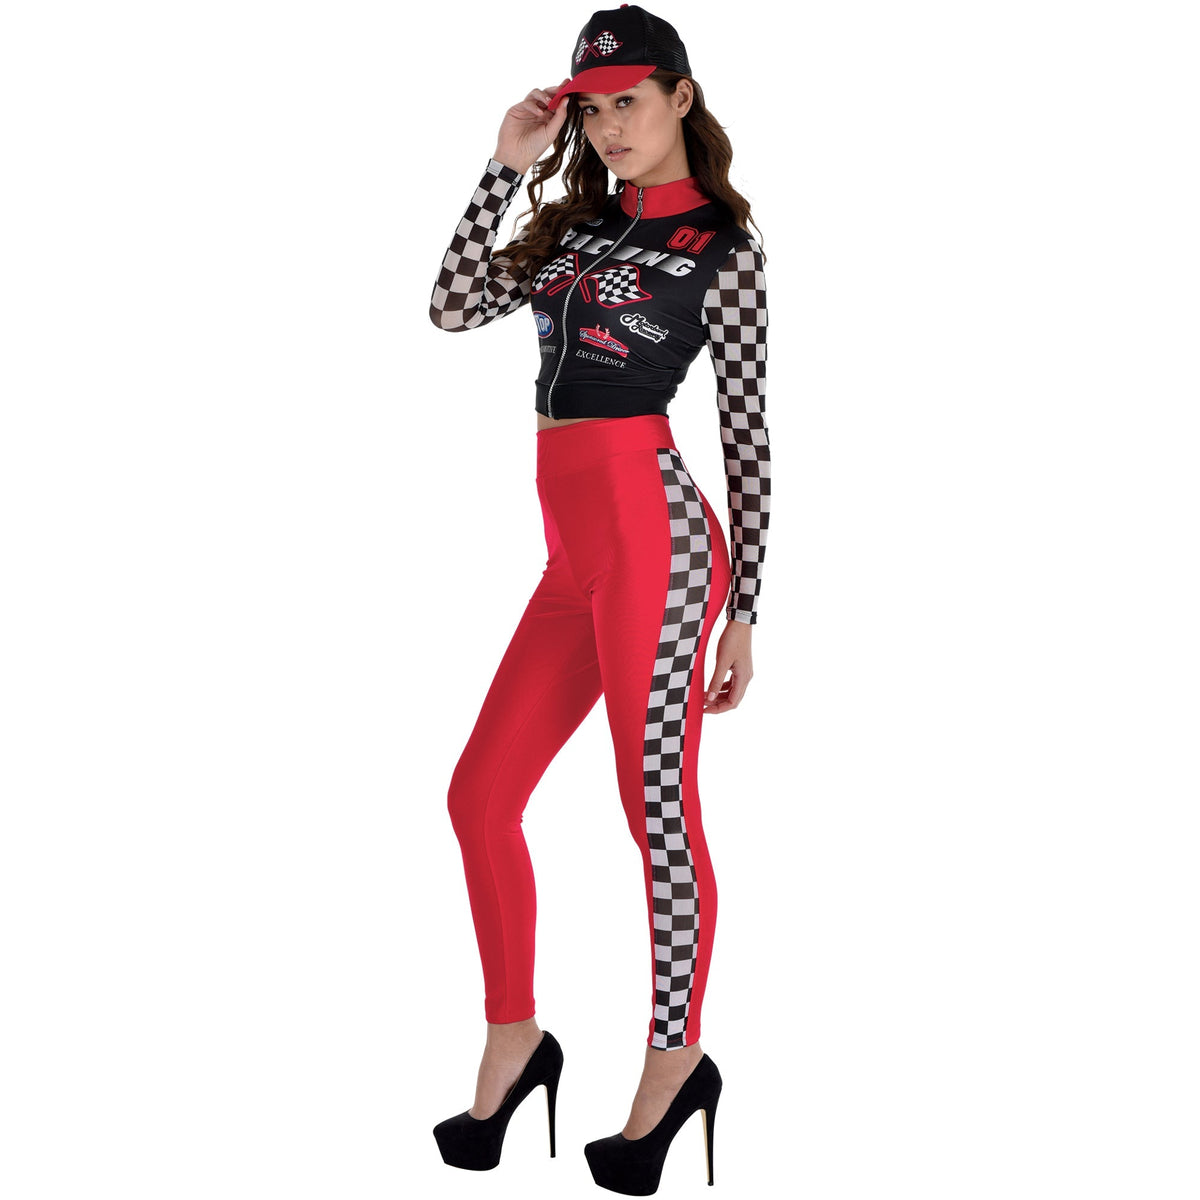 HALLOWEEN COSTUME CO. Costumes Racecar Driver Costume for Adults, Jacket and Leggings